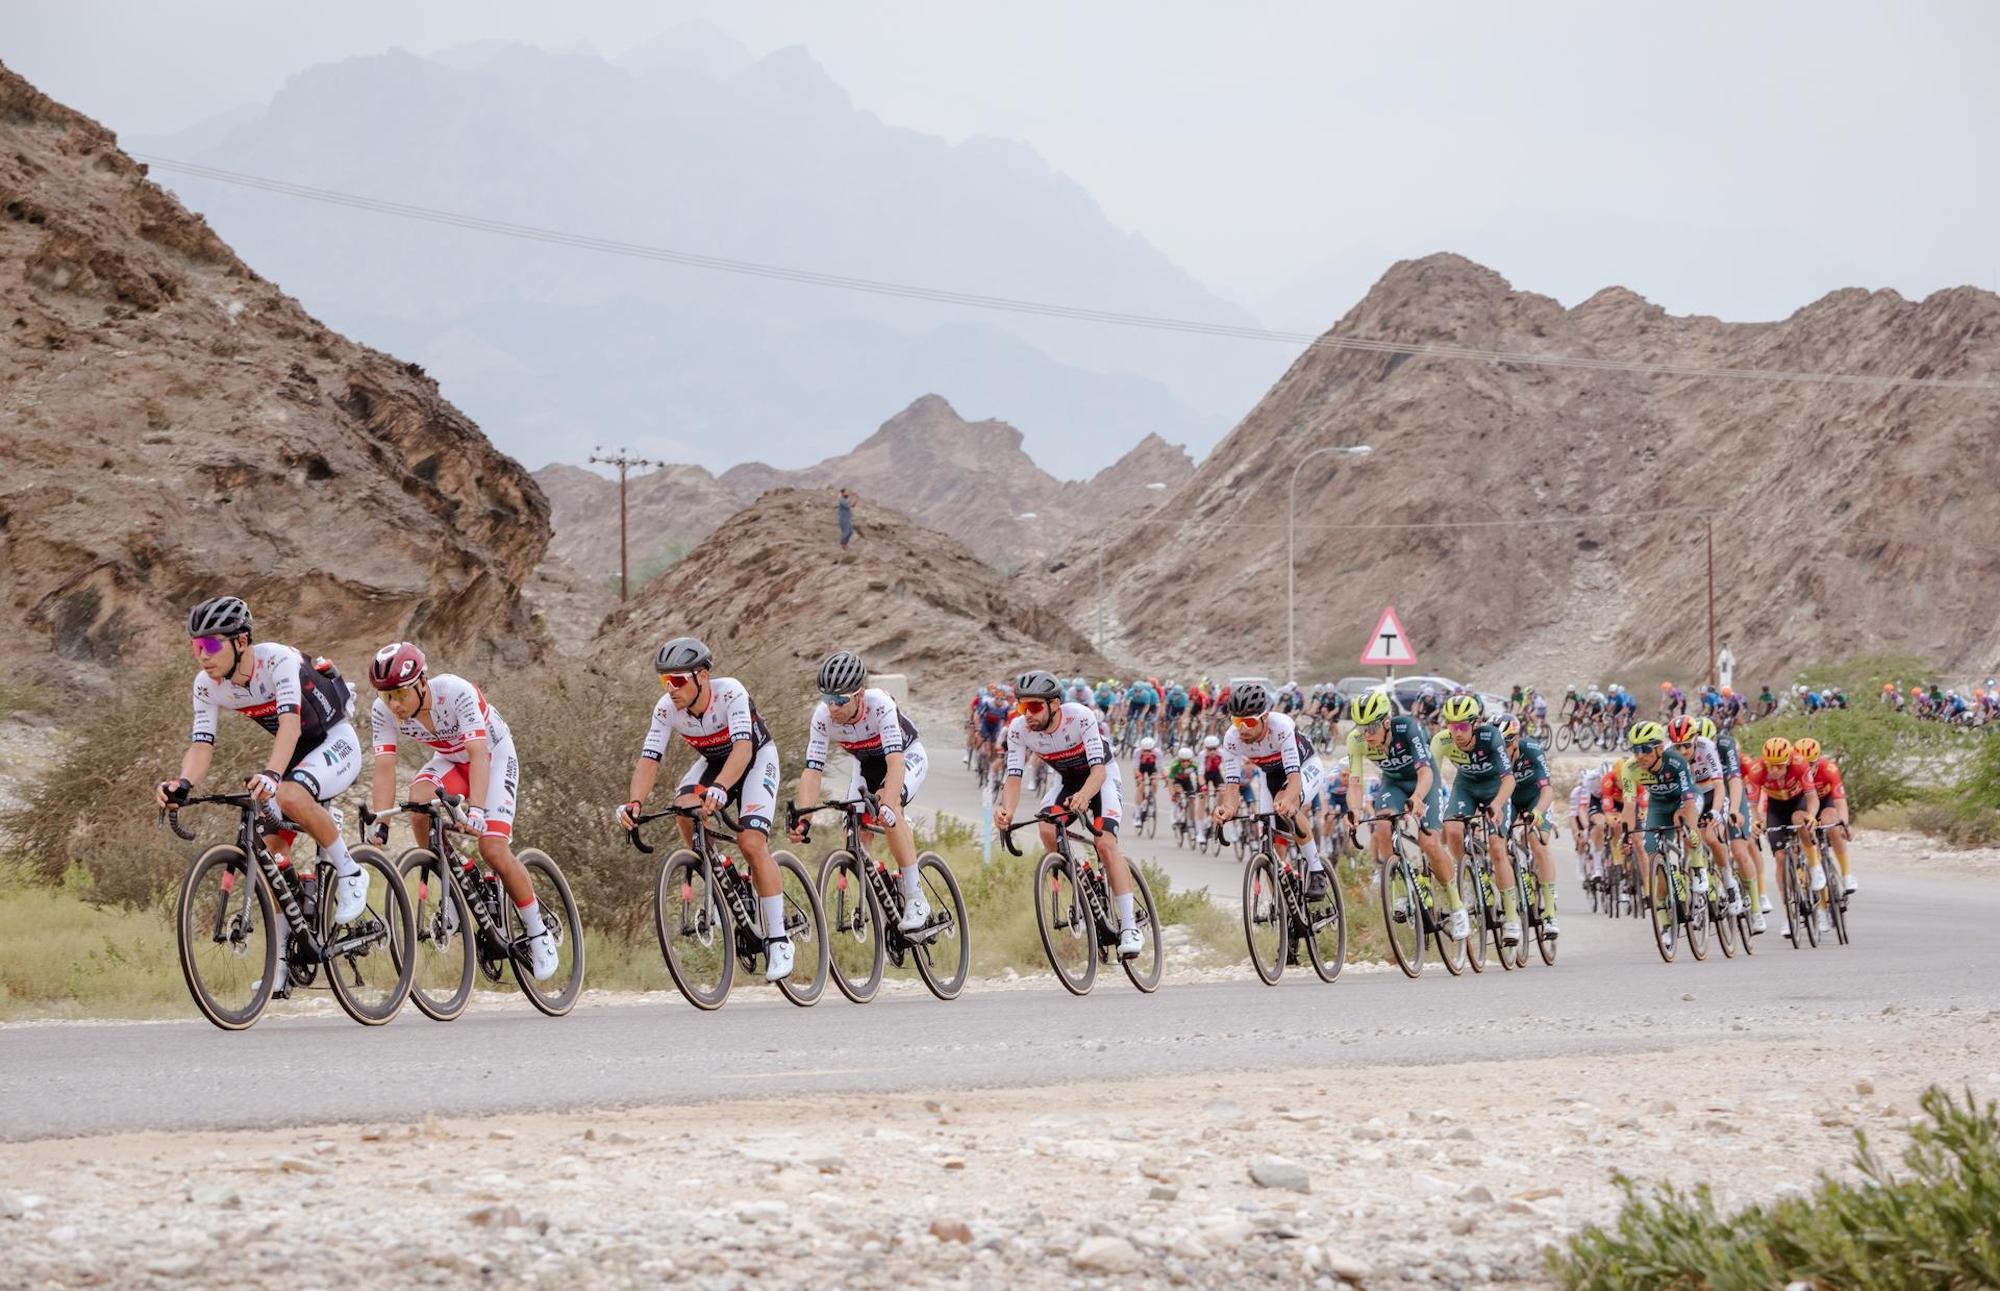 JCL Team UKYO lead from the front at the Tour of Oman.